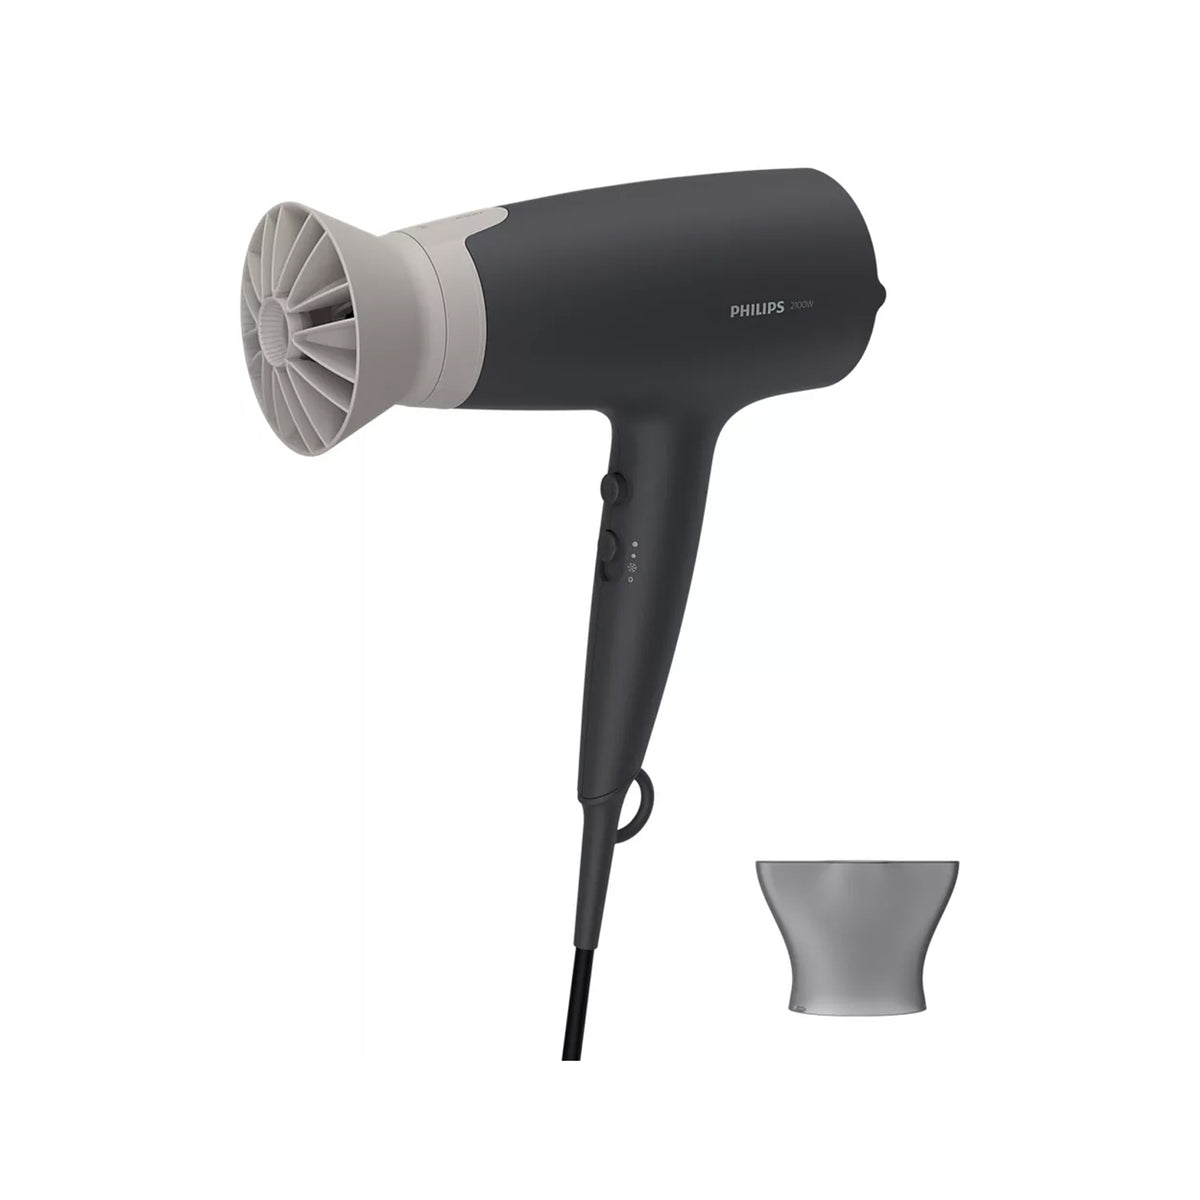 Philips BHD351/13 3000 Series AirFlower ThermoProtect Hair Dryer